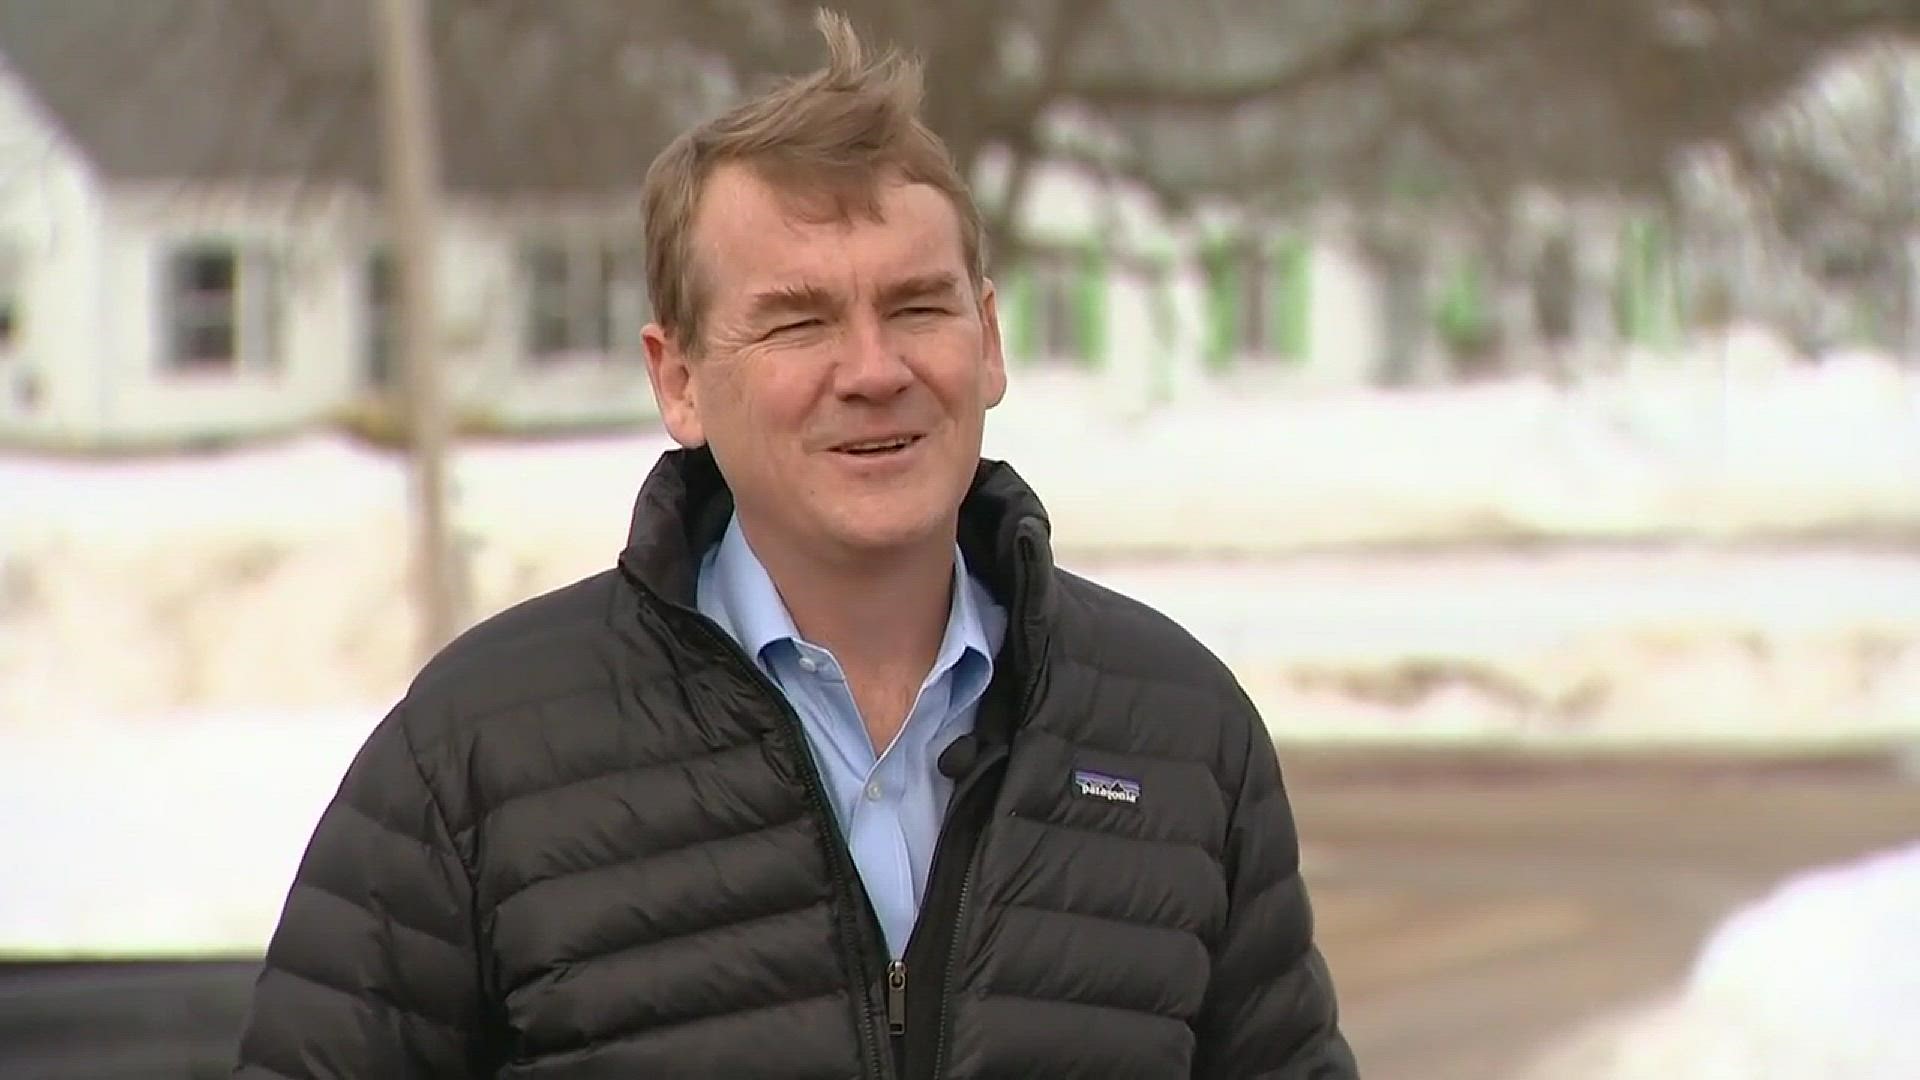 When asked what he's doing in Iowa, the former Denver Public Schools superintendent replied that he was just visiting schools. But U.S. Sen. Michael Bennet (D-Colorado) is quick to give an honest answer: he's thinking of running for president.